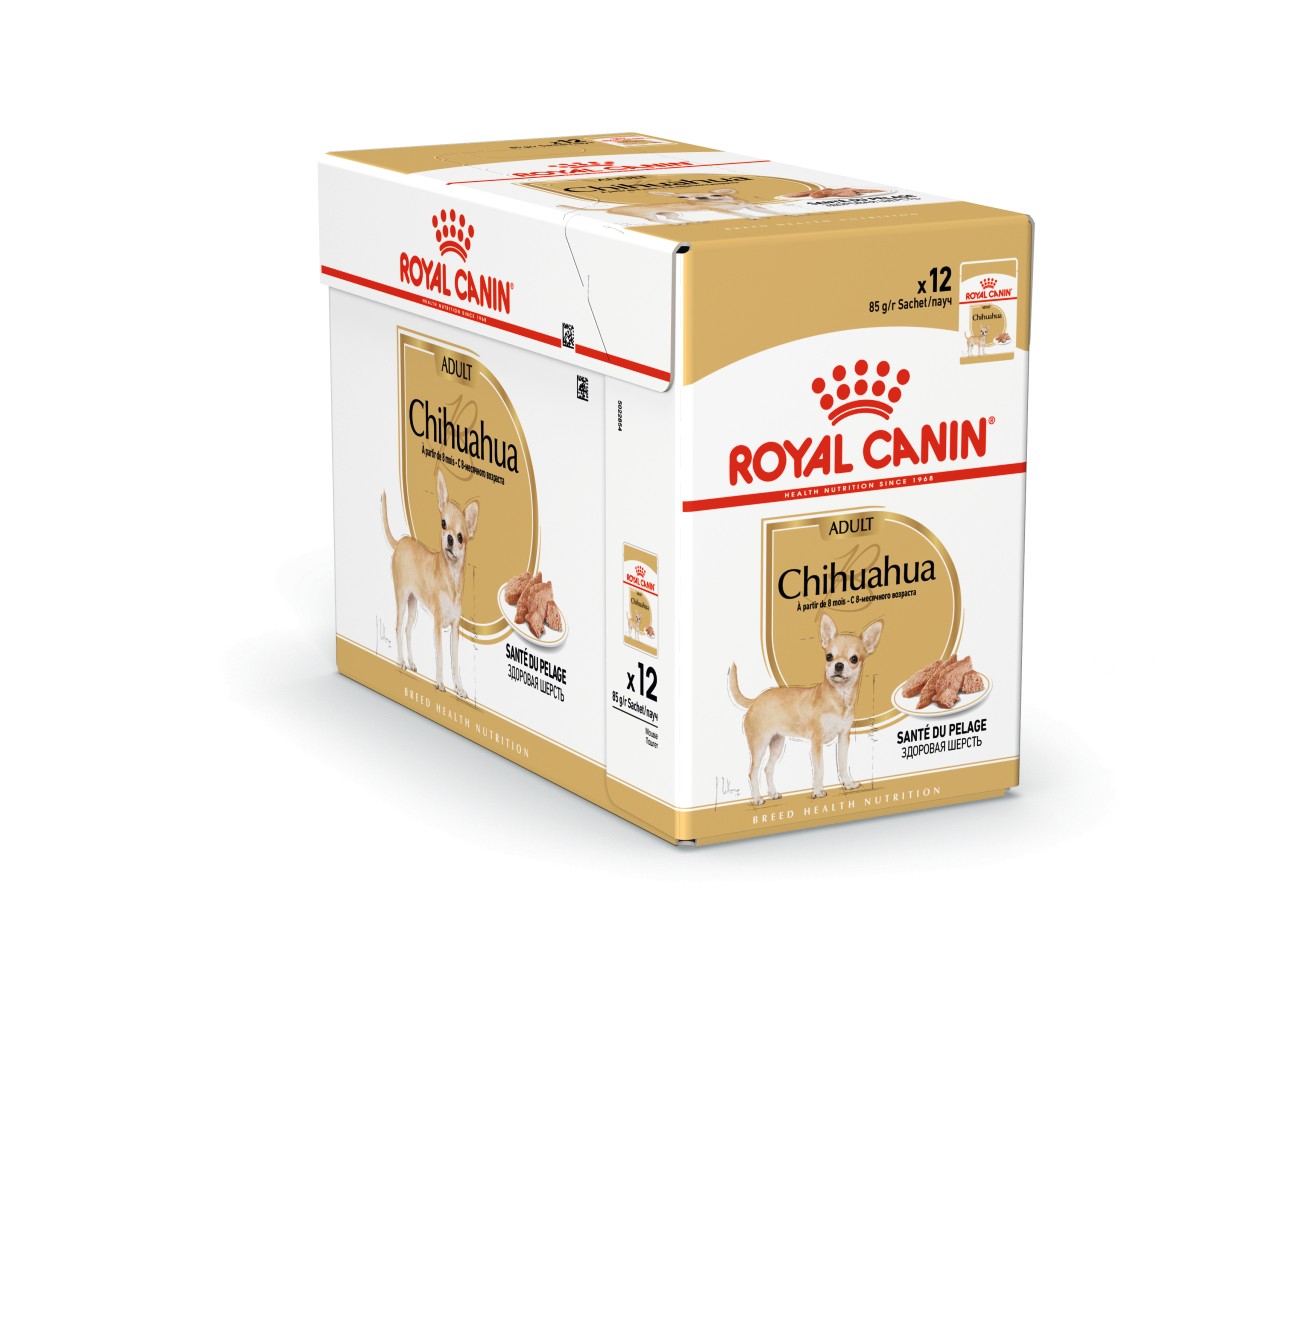 Royal Canin Chihuahua Adult Wet